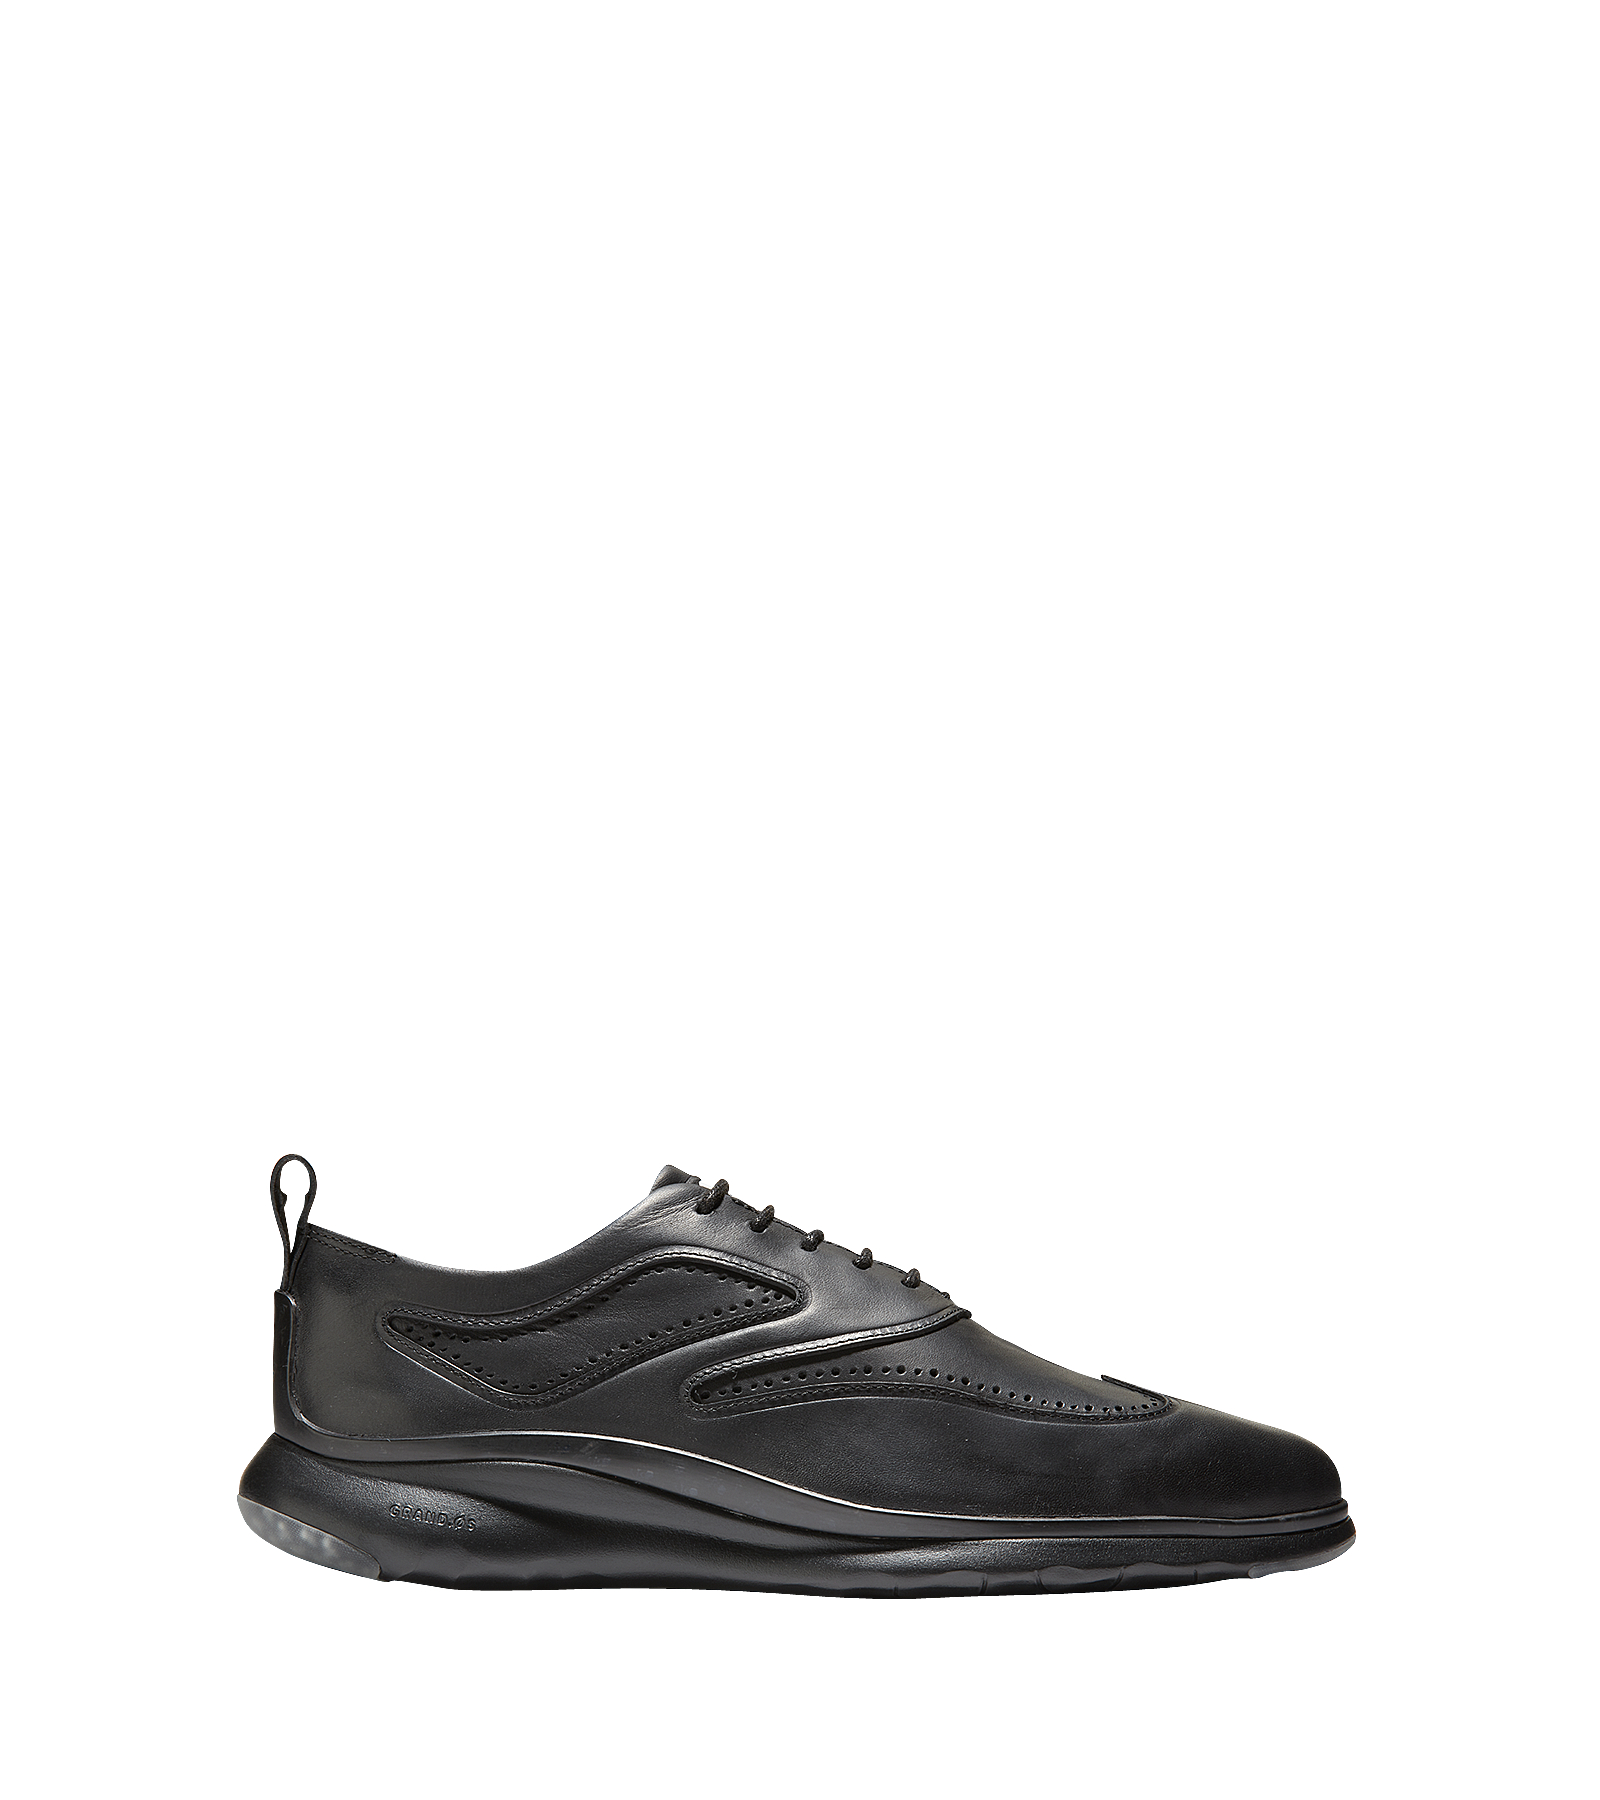 We Are Outlanders COLE HAAN X MASTERMIND - We Are Outlanders